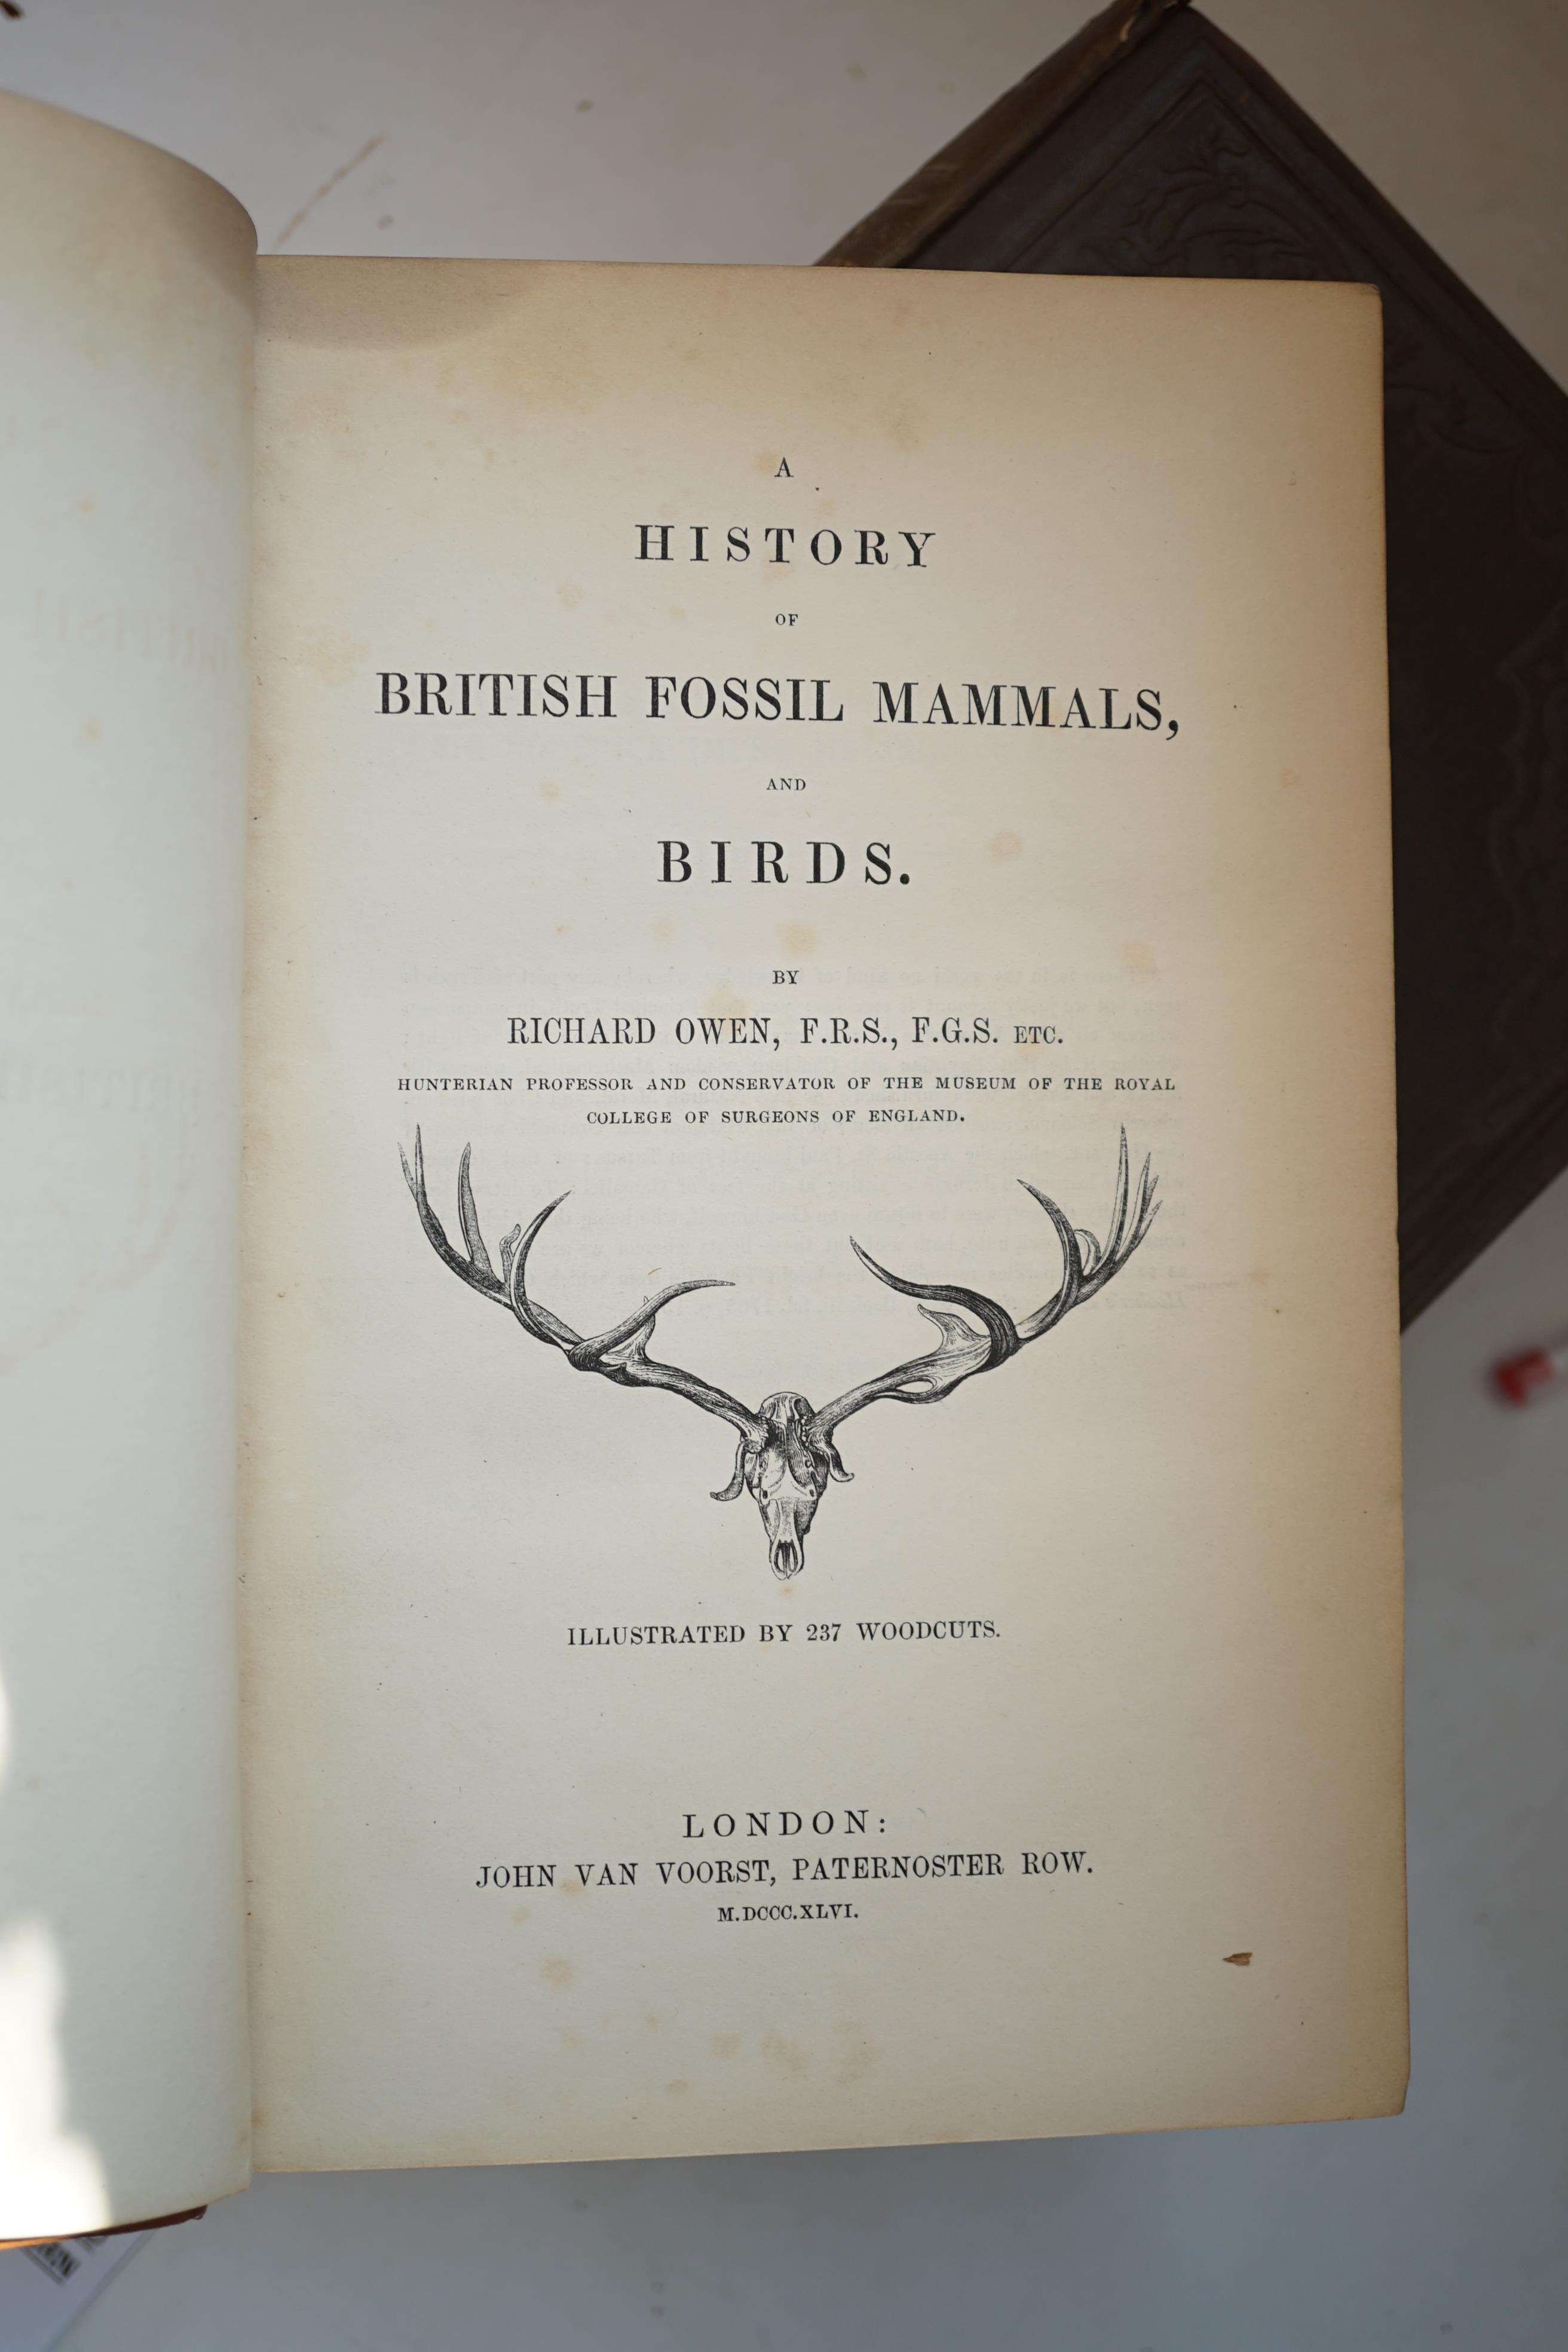 Owen, Richard - A History of British Fossil Mammals and Birds, 8vo, rebacked half calf, John Van Voorst, London, 1846 and Ritchie, Archibald Tucker - The Dynamical Theory of the Formation of the Earth, 2 vols, 8vo, blind